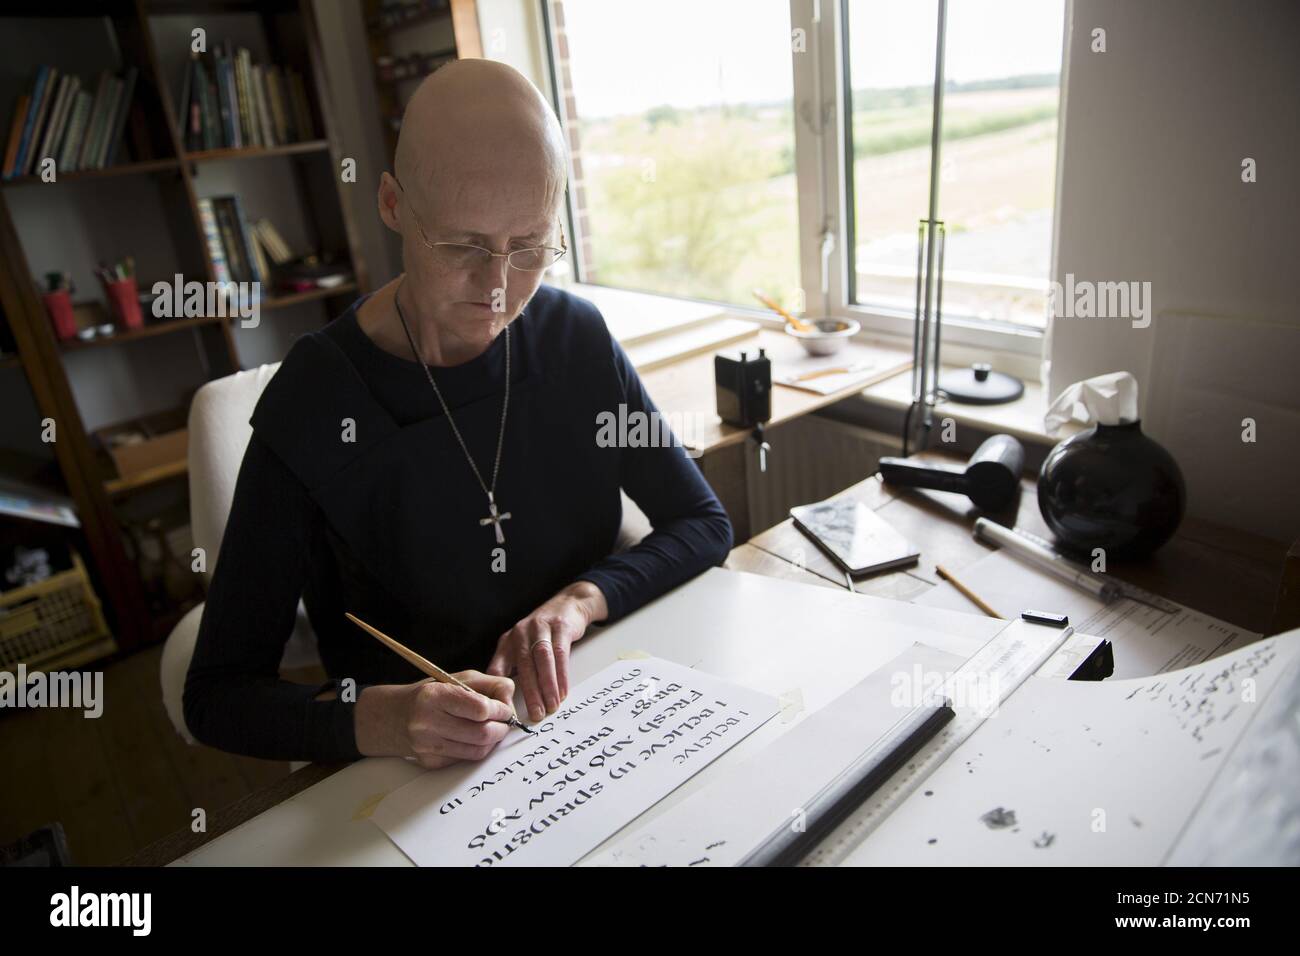 Sister Rachel Denton practices her calligraphy St Cuthbert's Hermitage in Lincolnshire, north east Britain August 24, 2015. Denton, a Catholic hermit, rises early to tend to her vegetable garden, feed her cats and pray. But the former Carmelite nun, who in 2006 pledged to live the rest of her life in solitude, has another chore - to update her Twitter account and check Facebook. 'The myth you often face as a hermit is that you should have a beard and live in a cave. None of which is me,' says the ex-teacher. For the modern-day hermit, she says social media is vital: 'tweets are rare, but preci Stock Photo